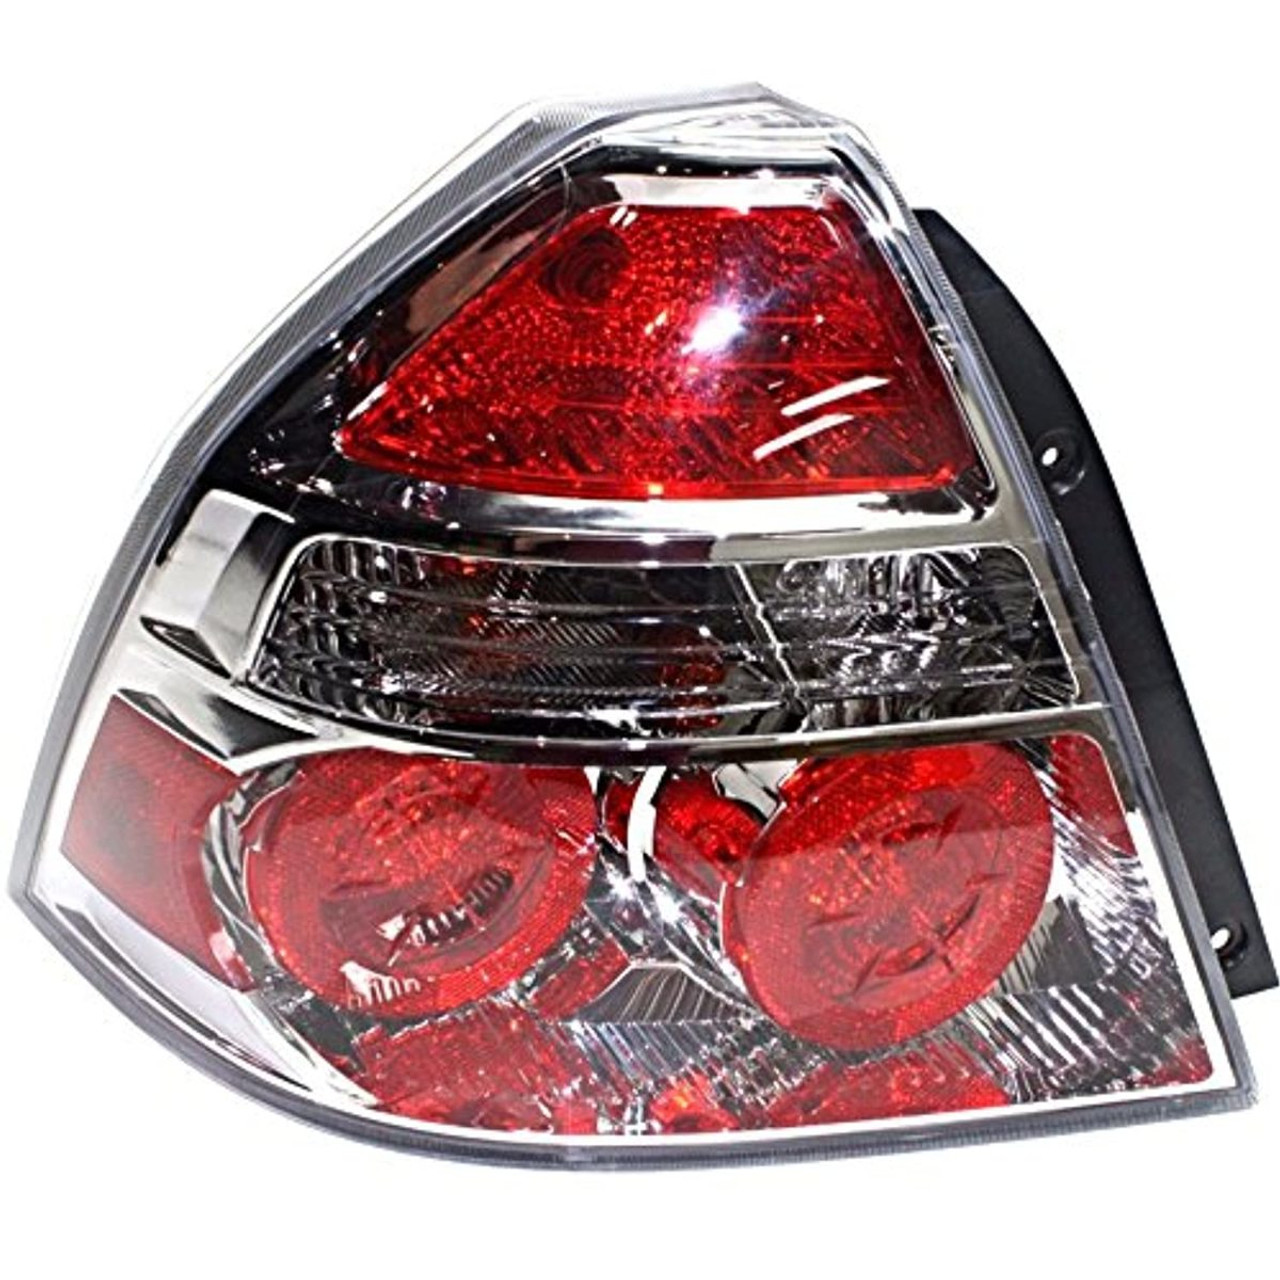 Fits 07-11 Chev Aveo Left Dr RearTail Lamp Assembly w/ Bulbs & Wiring Harness